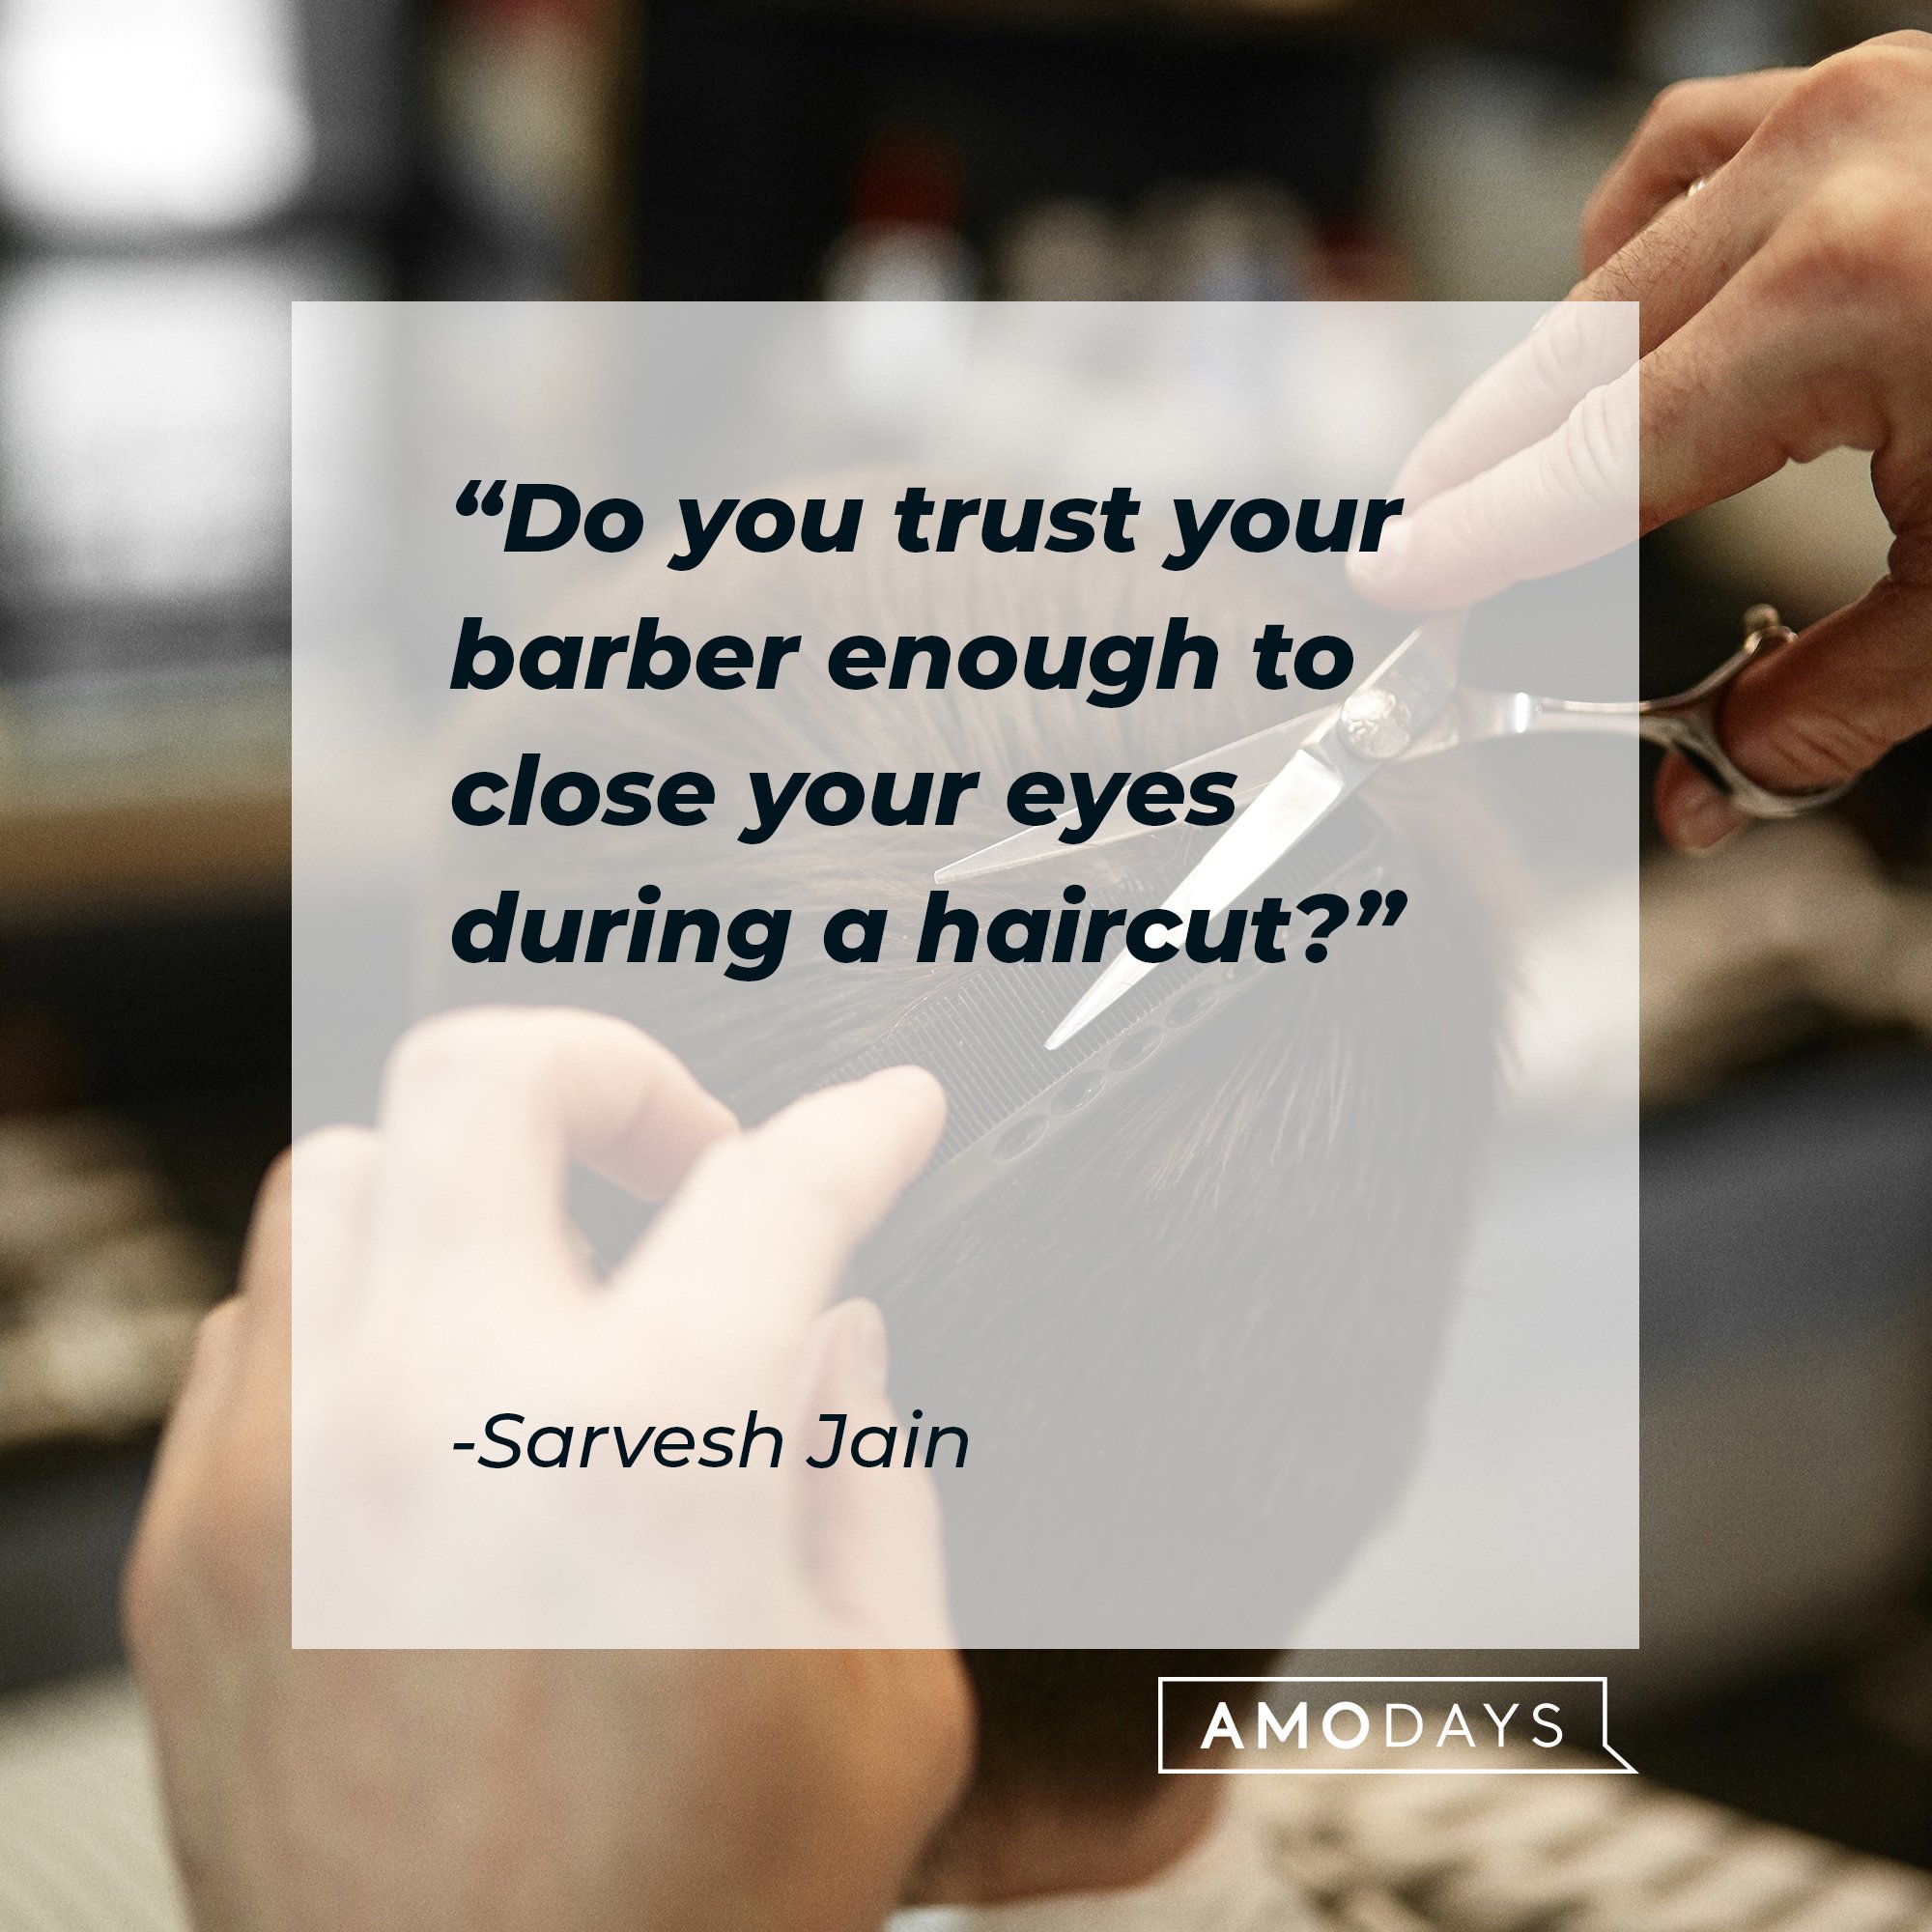 Sarvesh Jain's quote: "Do you trust your barber enough to close your eyes during a haircut?" | Image: AmoDays